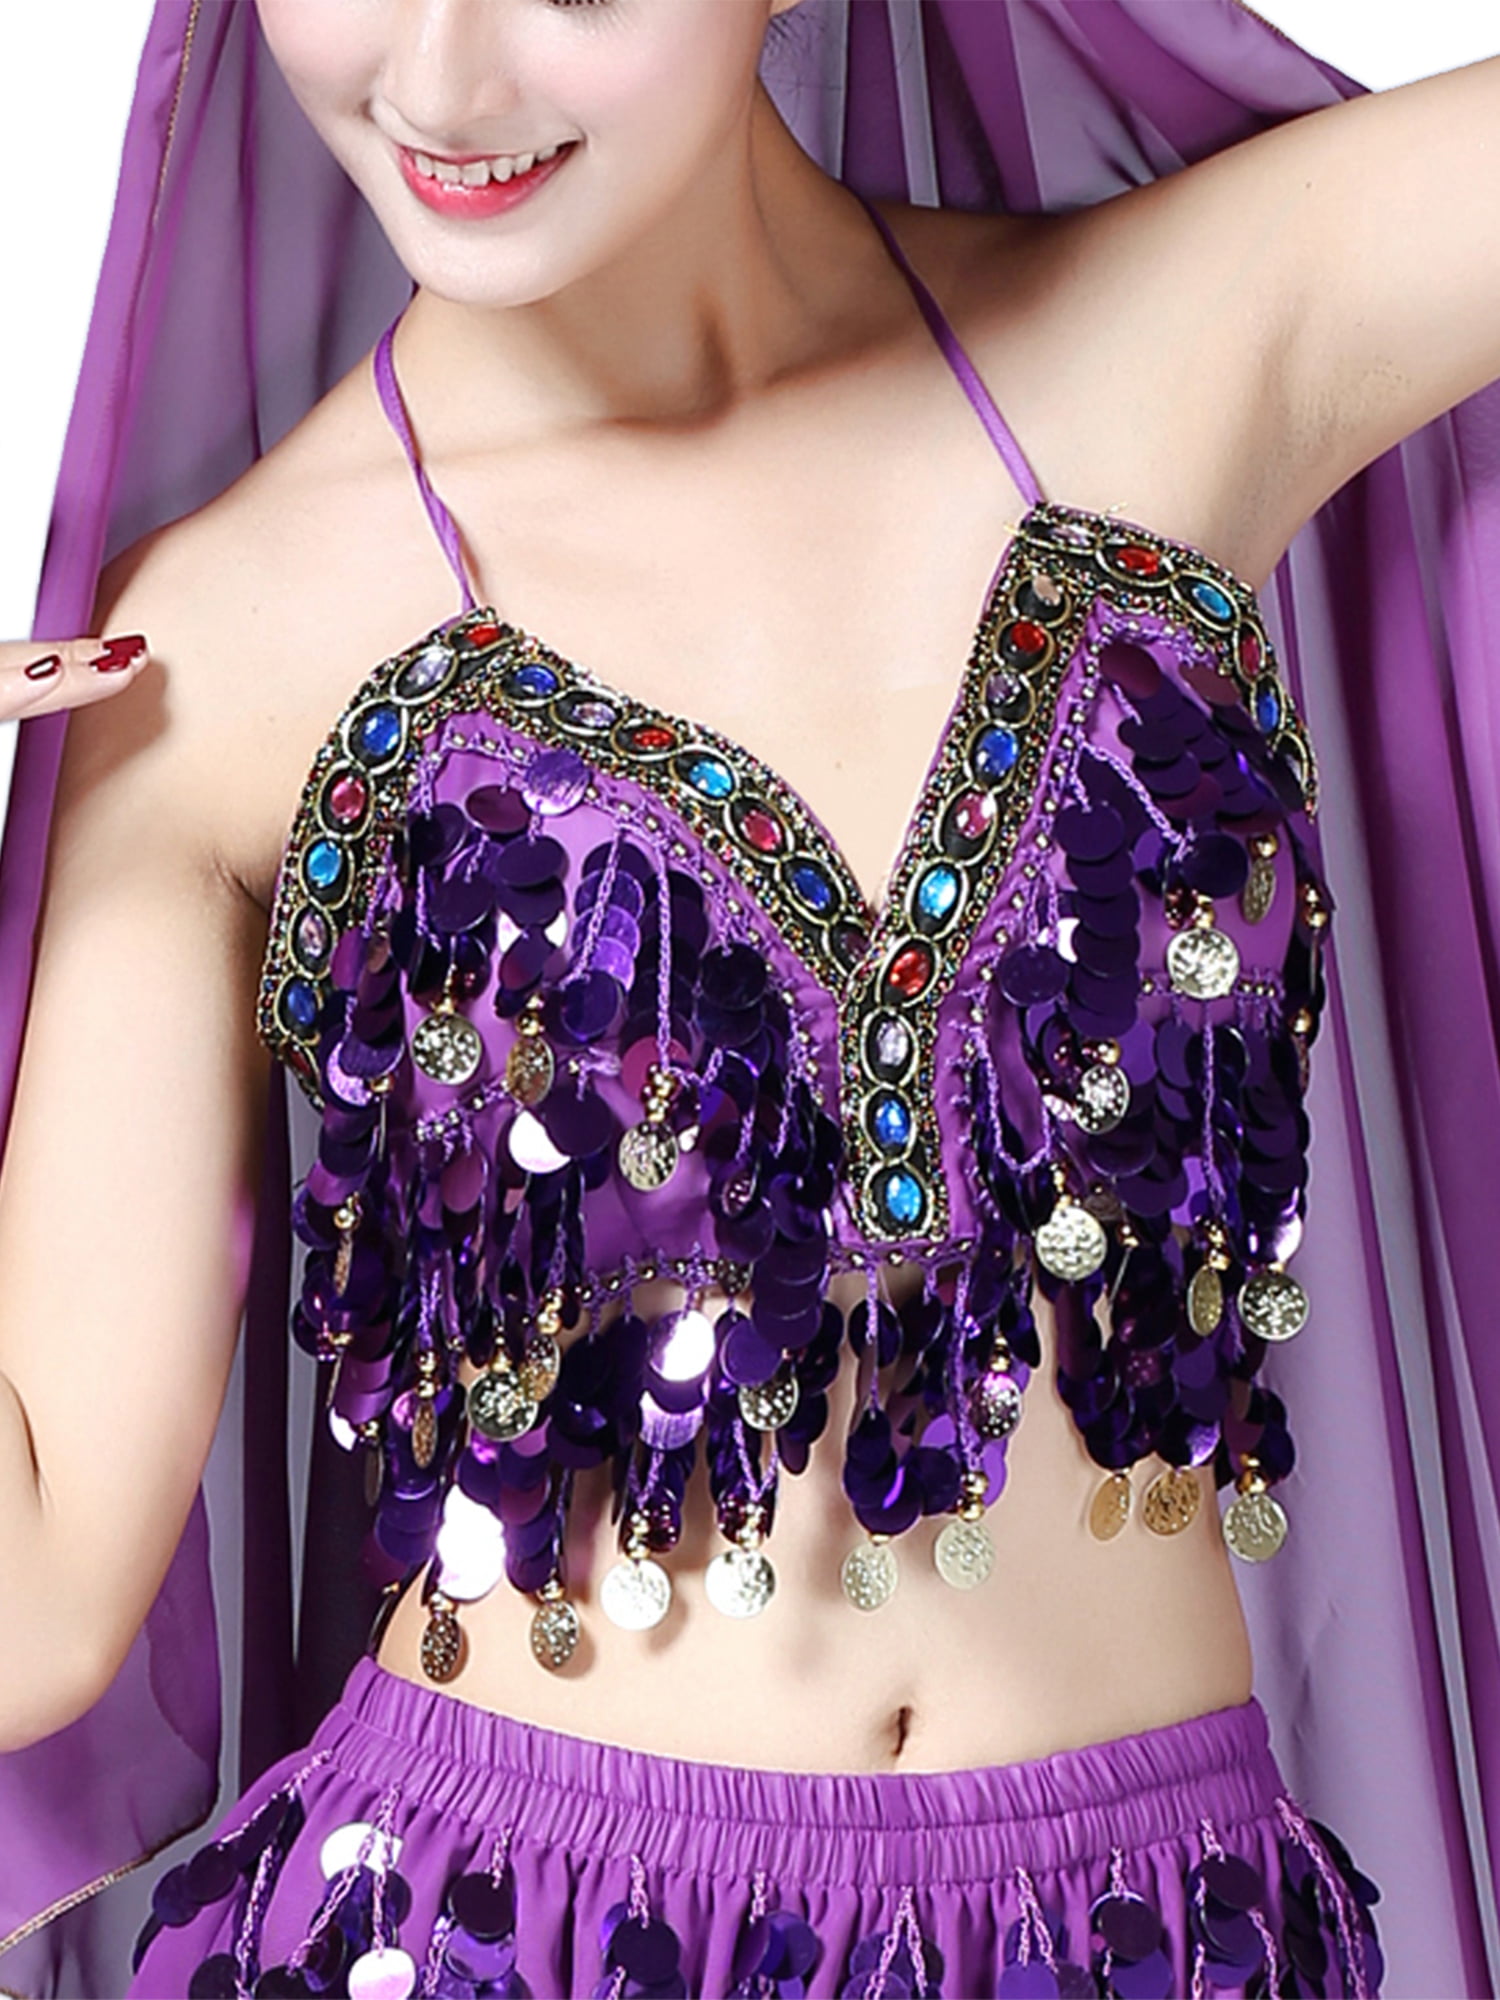 NWT Purple Belly Dance Blinged Out Beaded Sequin Bra Top Size 36-38 B/C